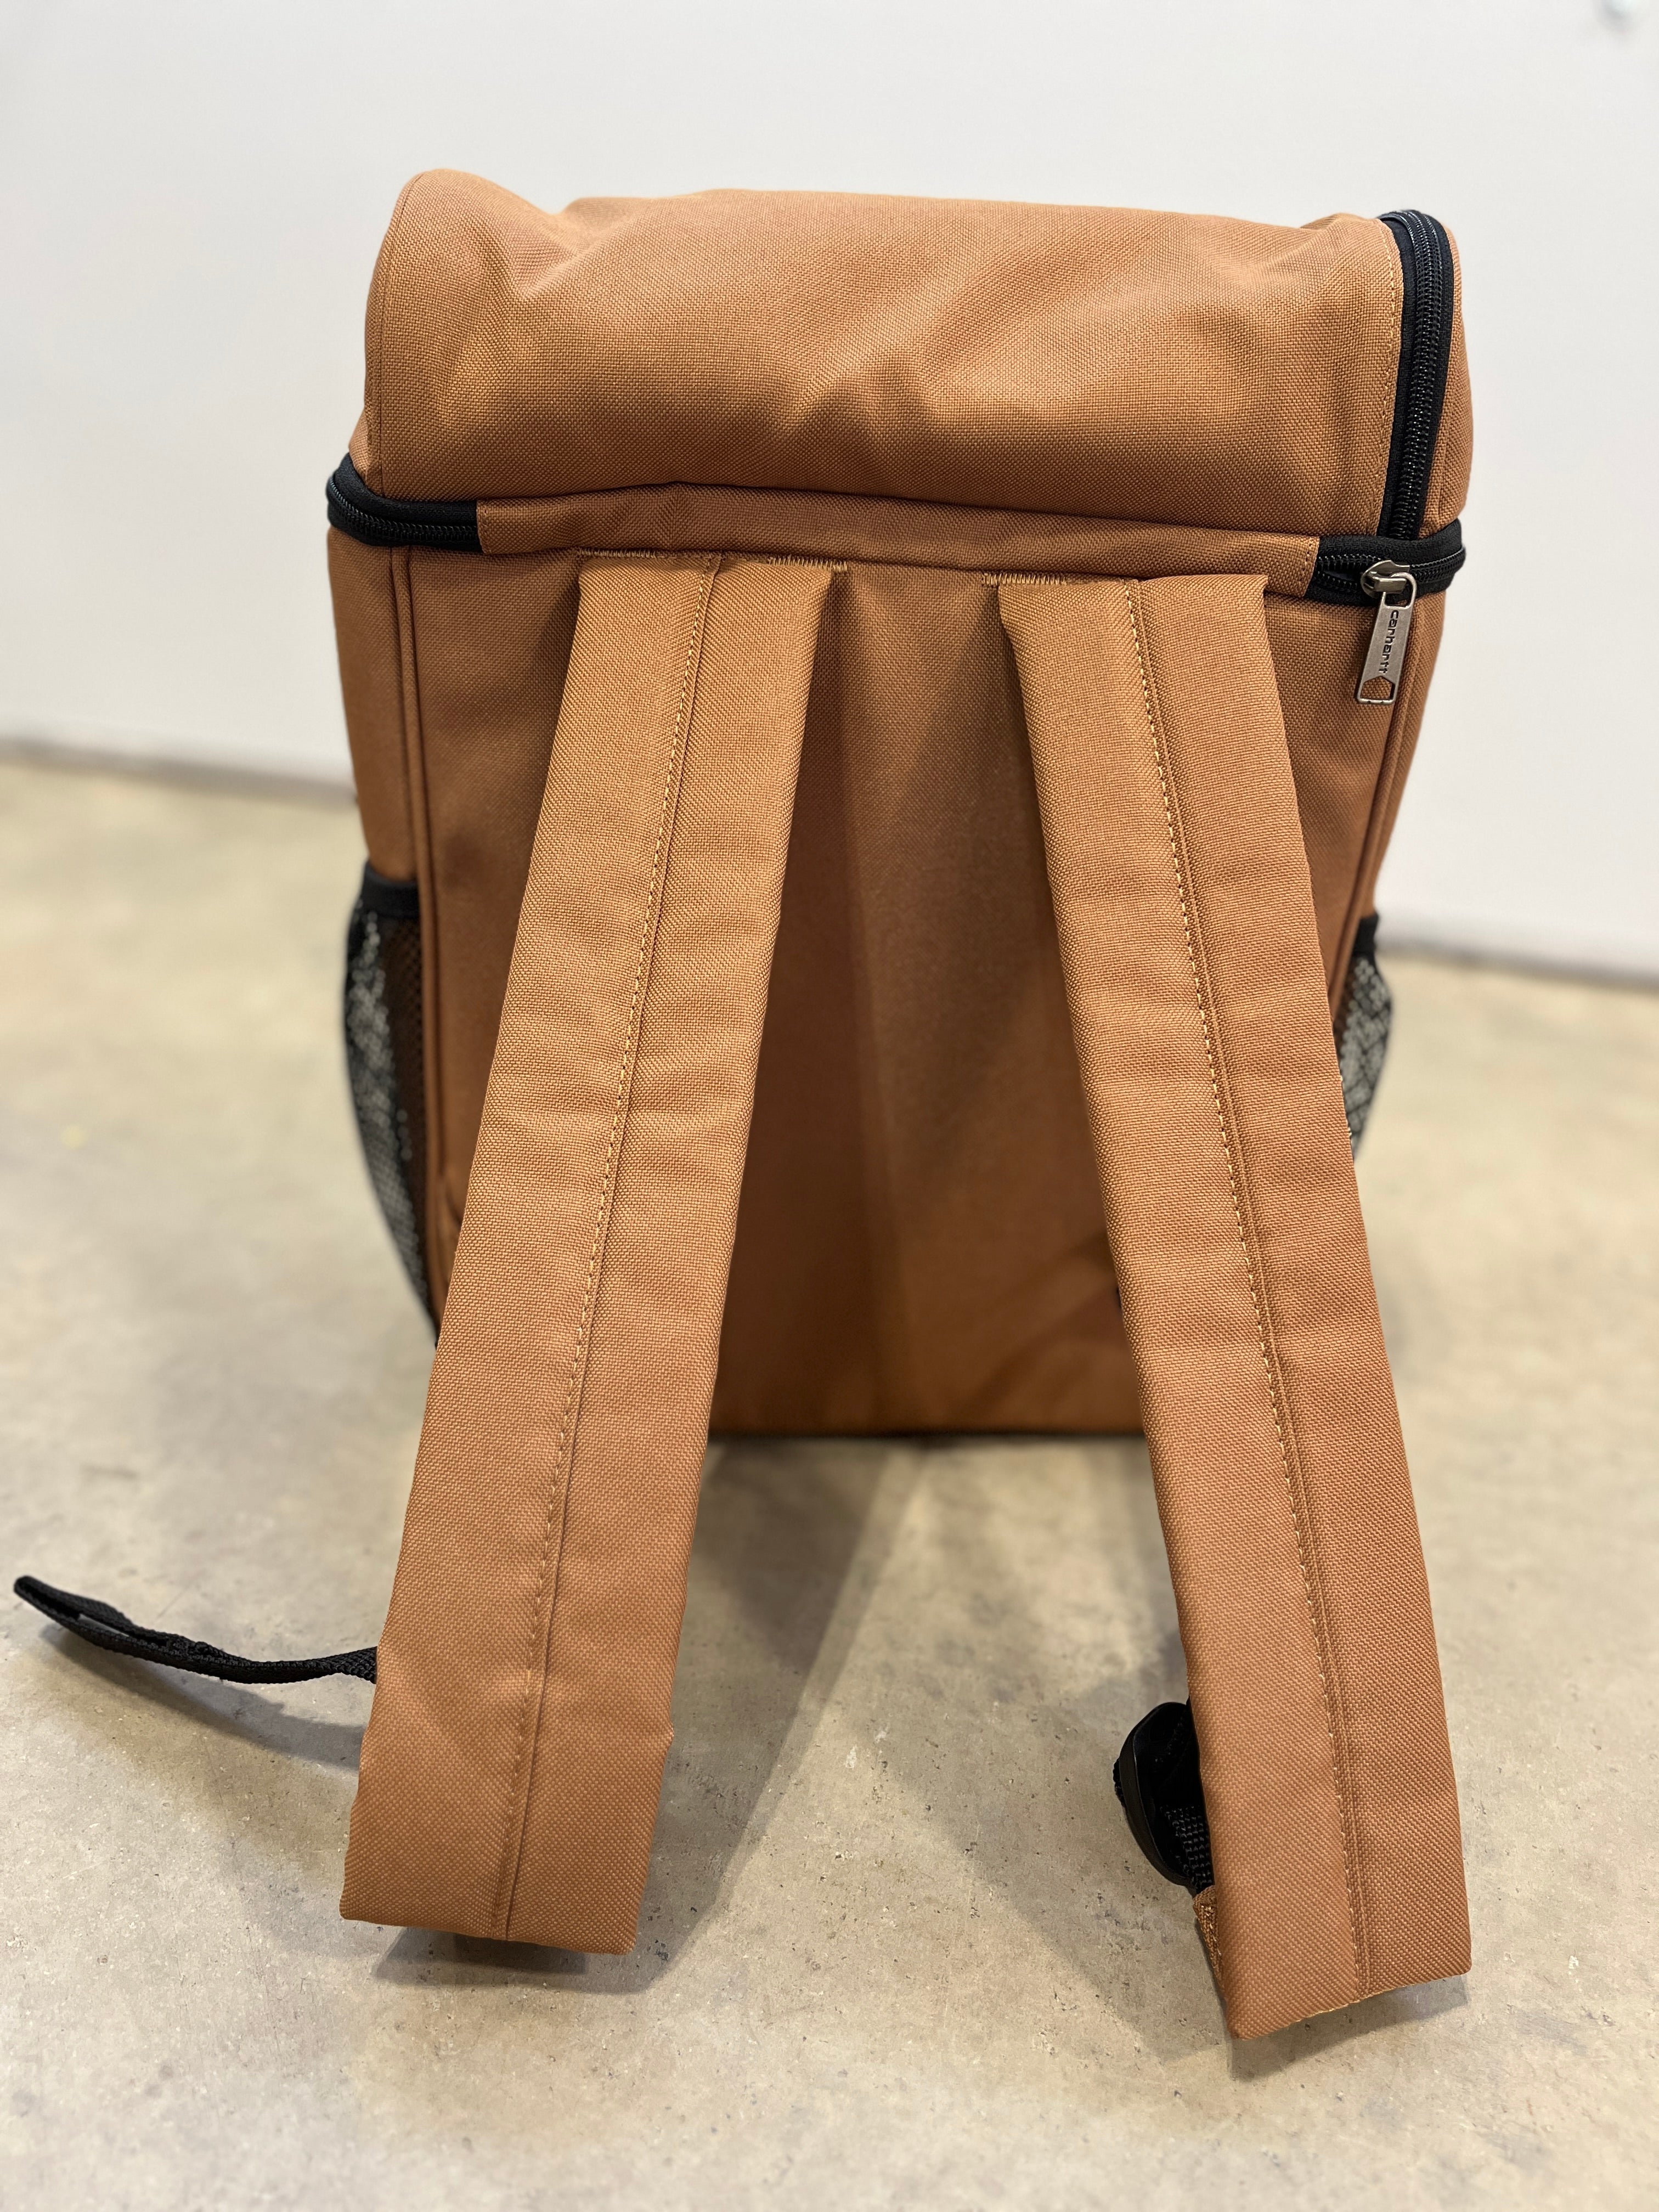 NEW ‘Farmer’s Water’ Backpack Cooler